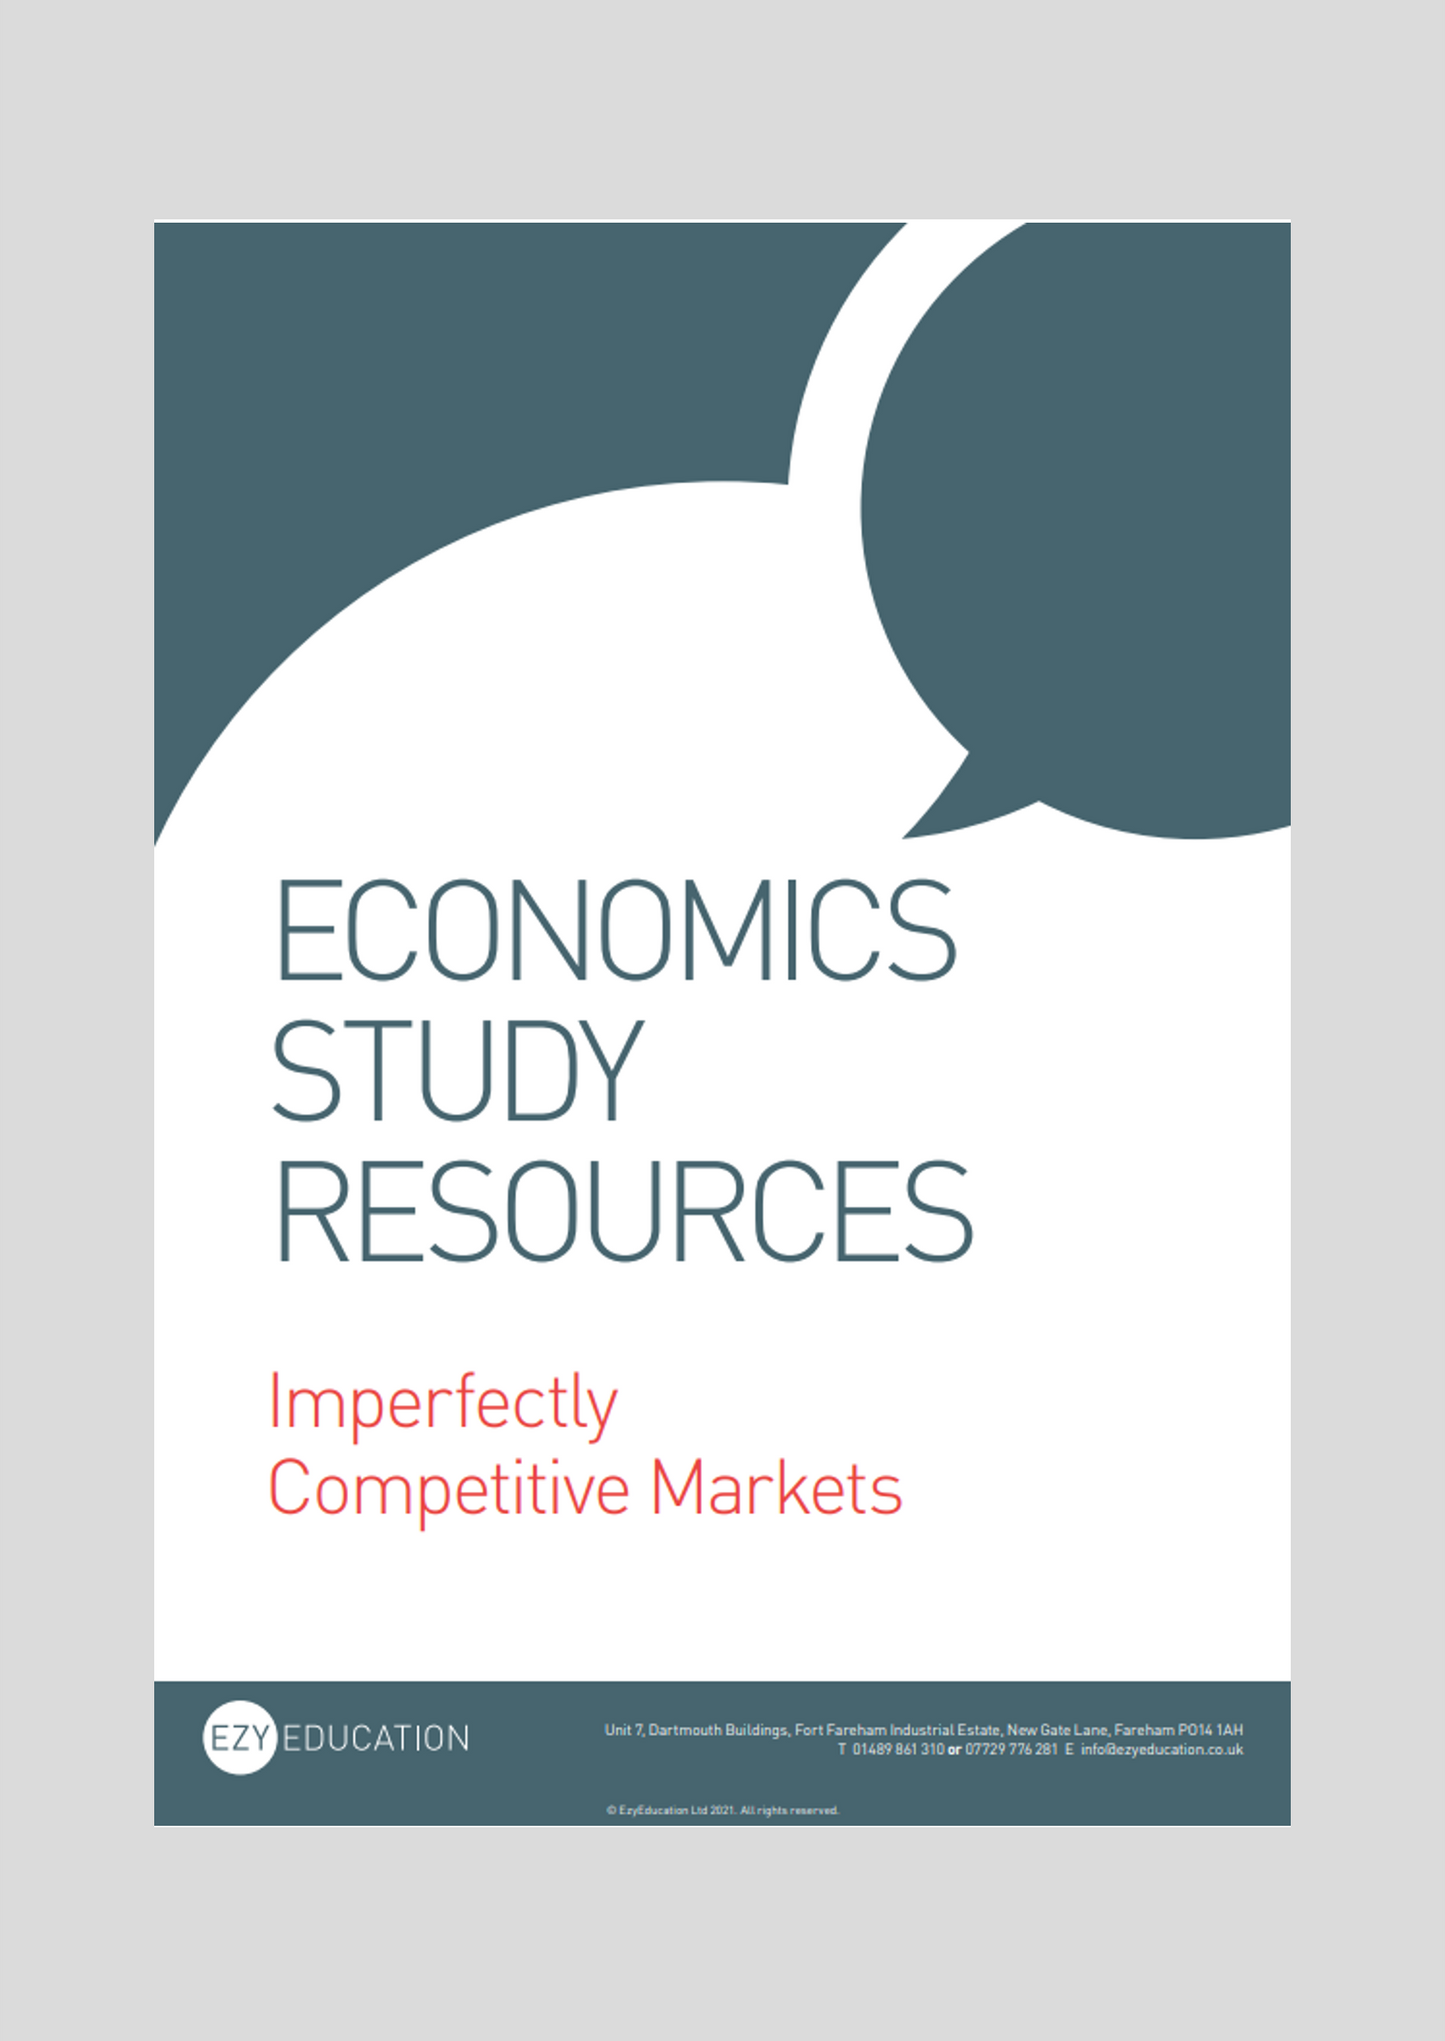 A-Level Microeconomics Study Guide - Module 7: Imperfectly Competitive Markets